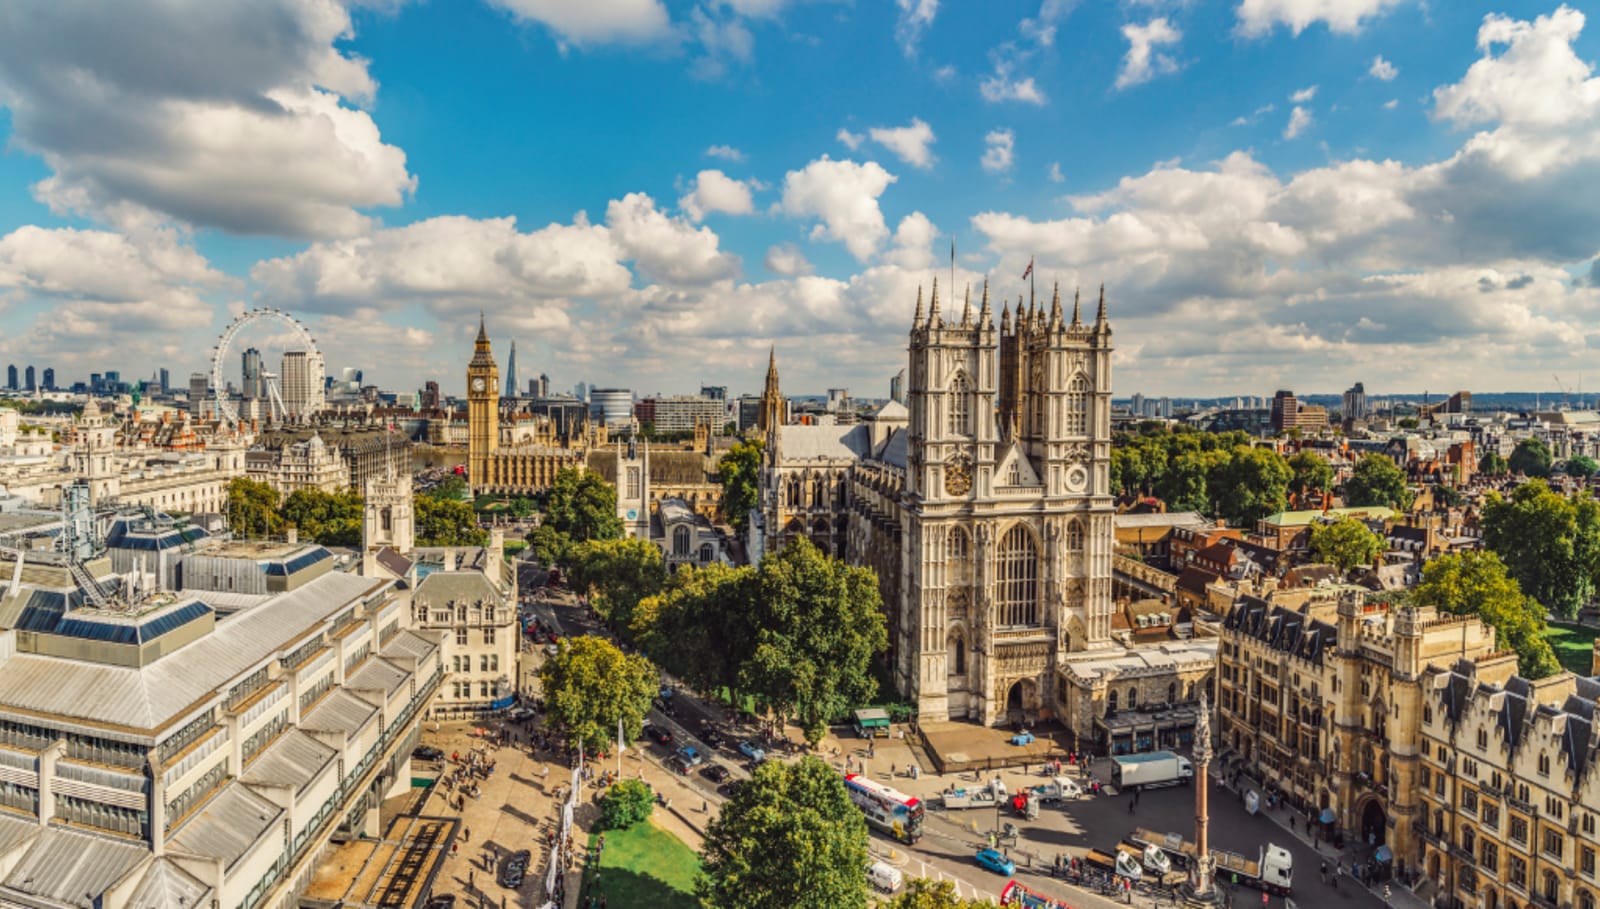 Aerial view of Westminster Abbey and Big Ben